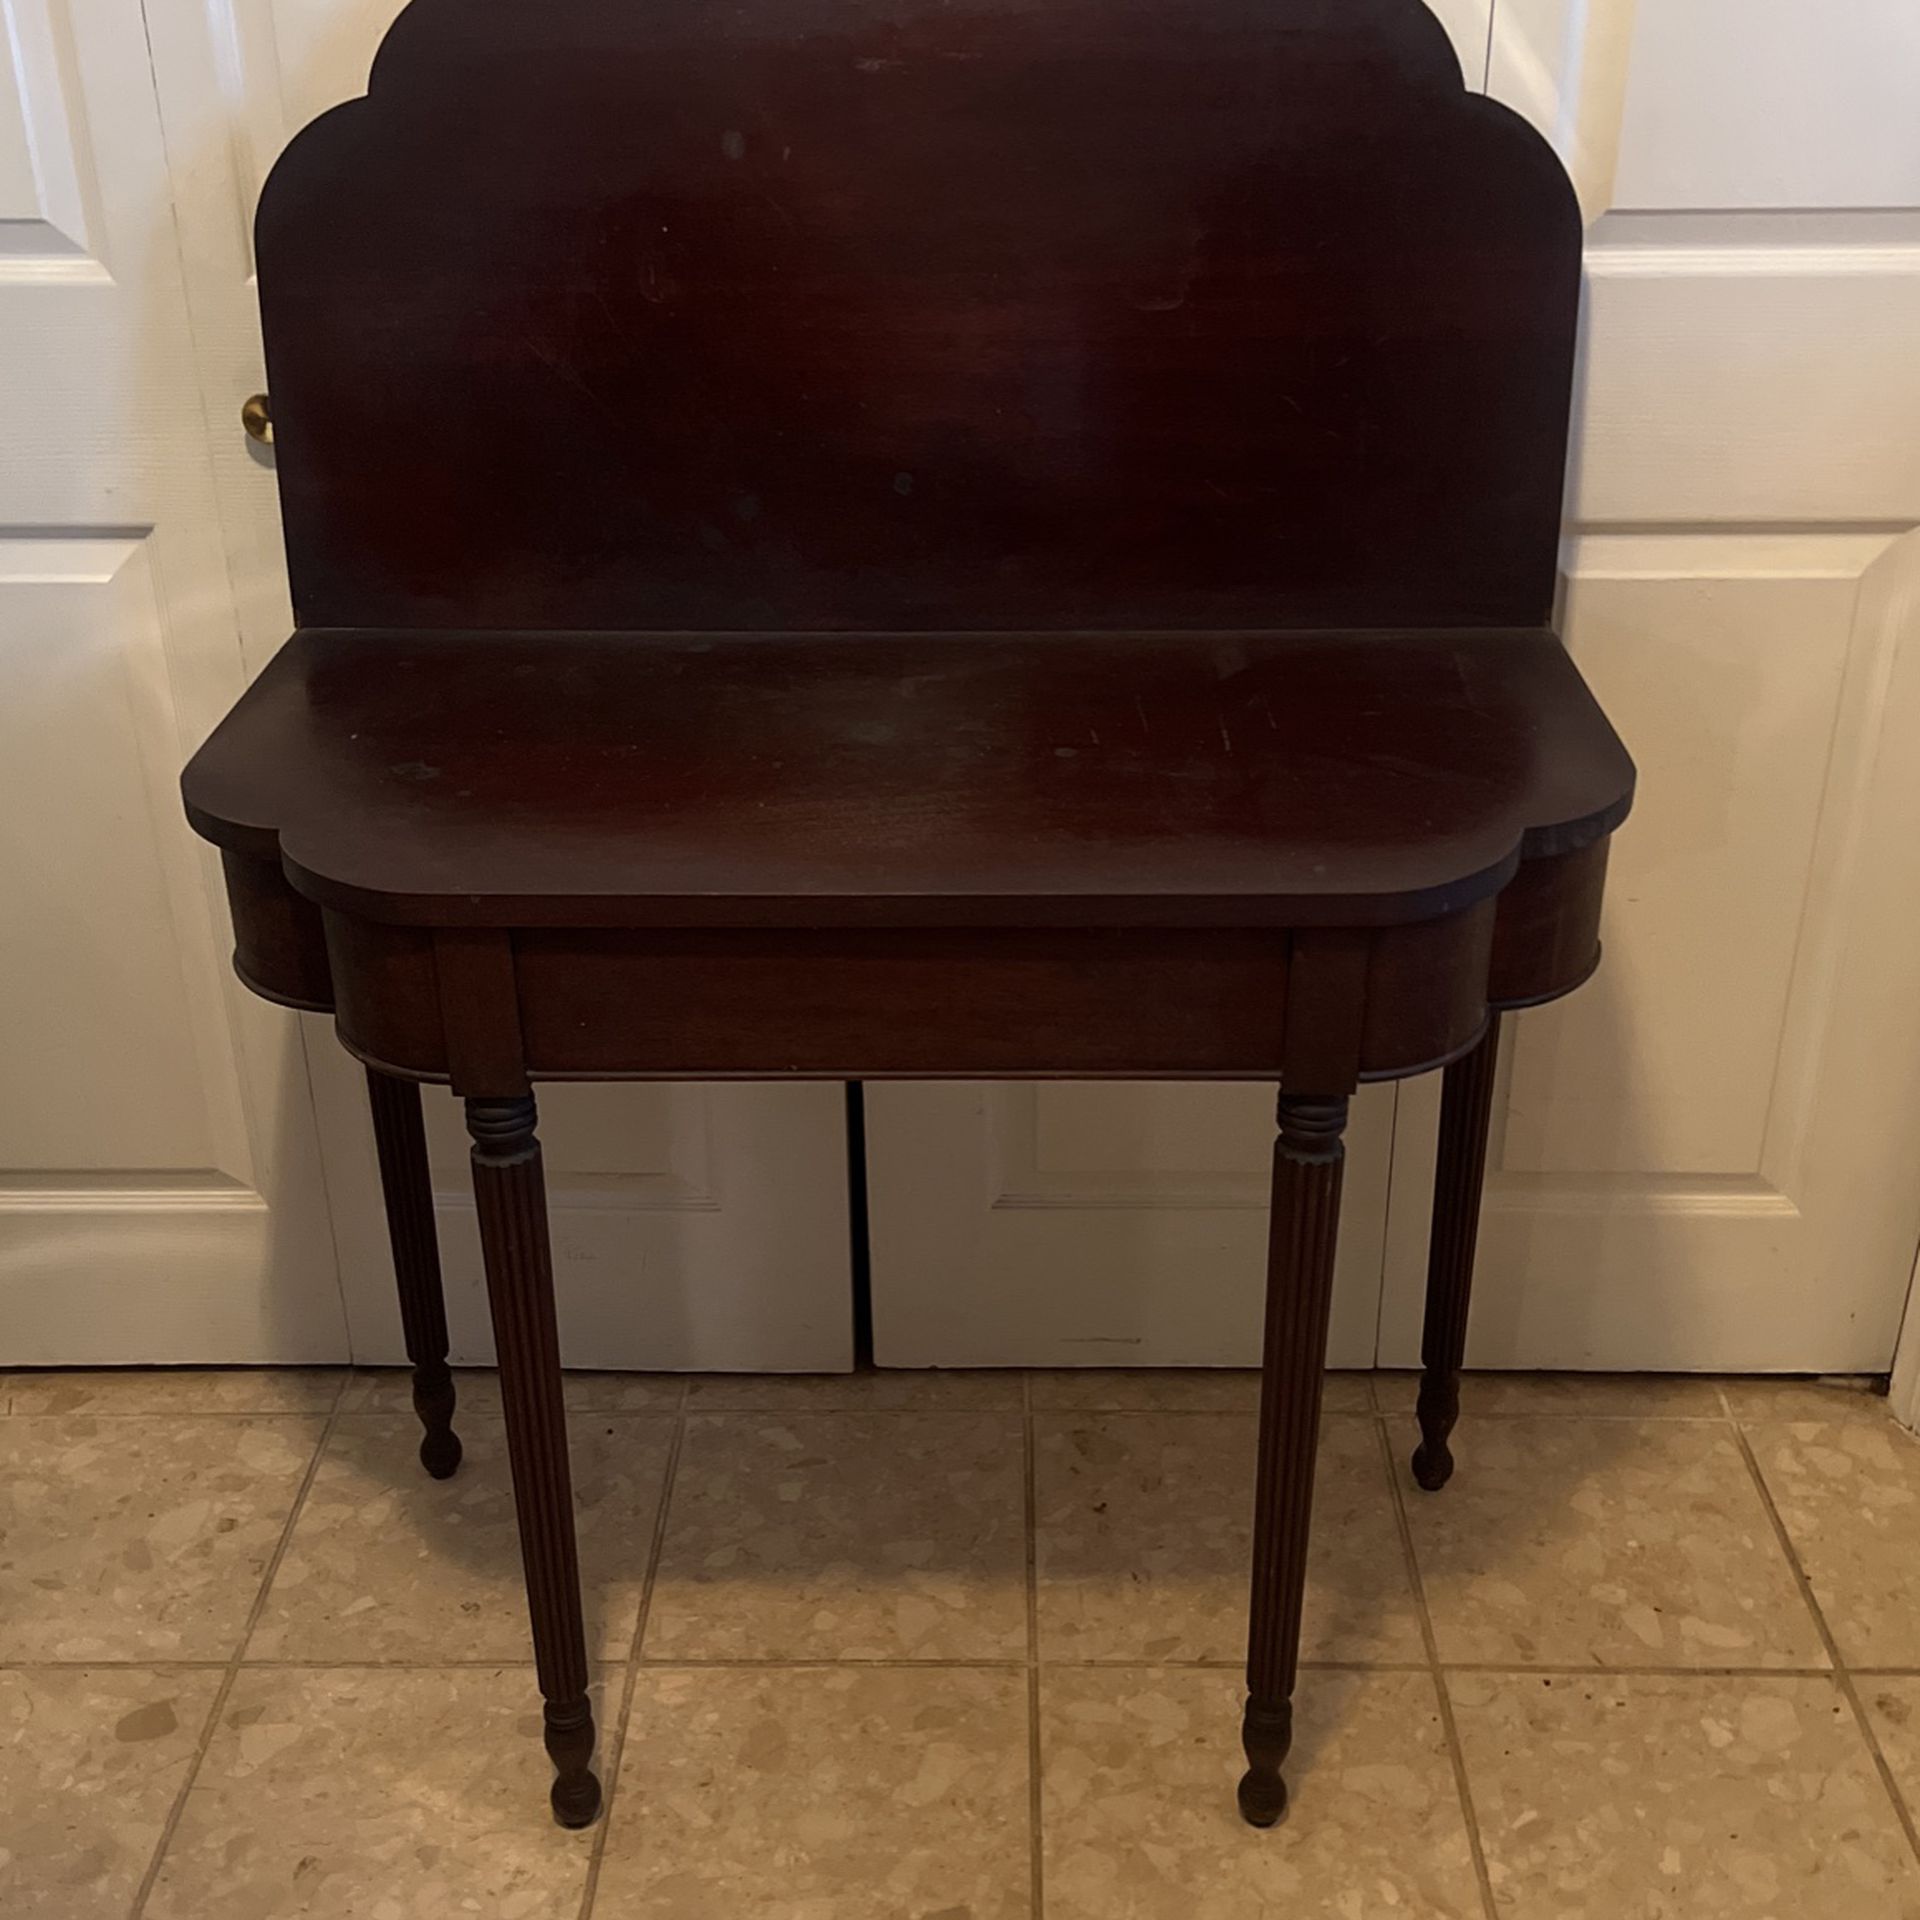 Antique Game Table